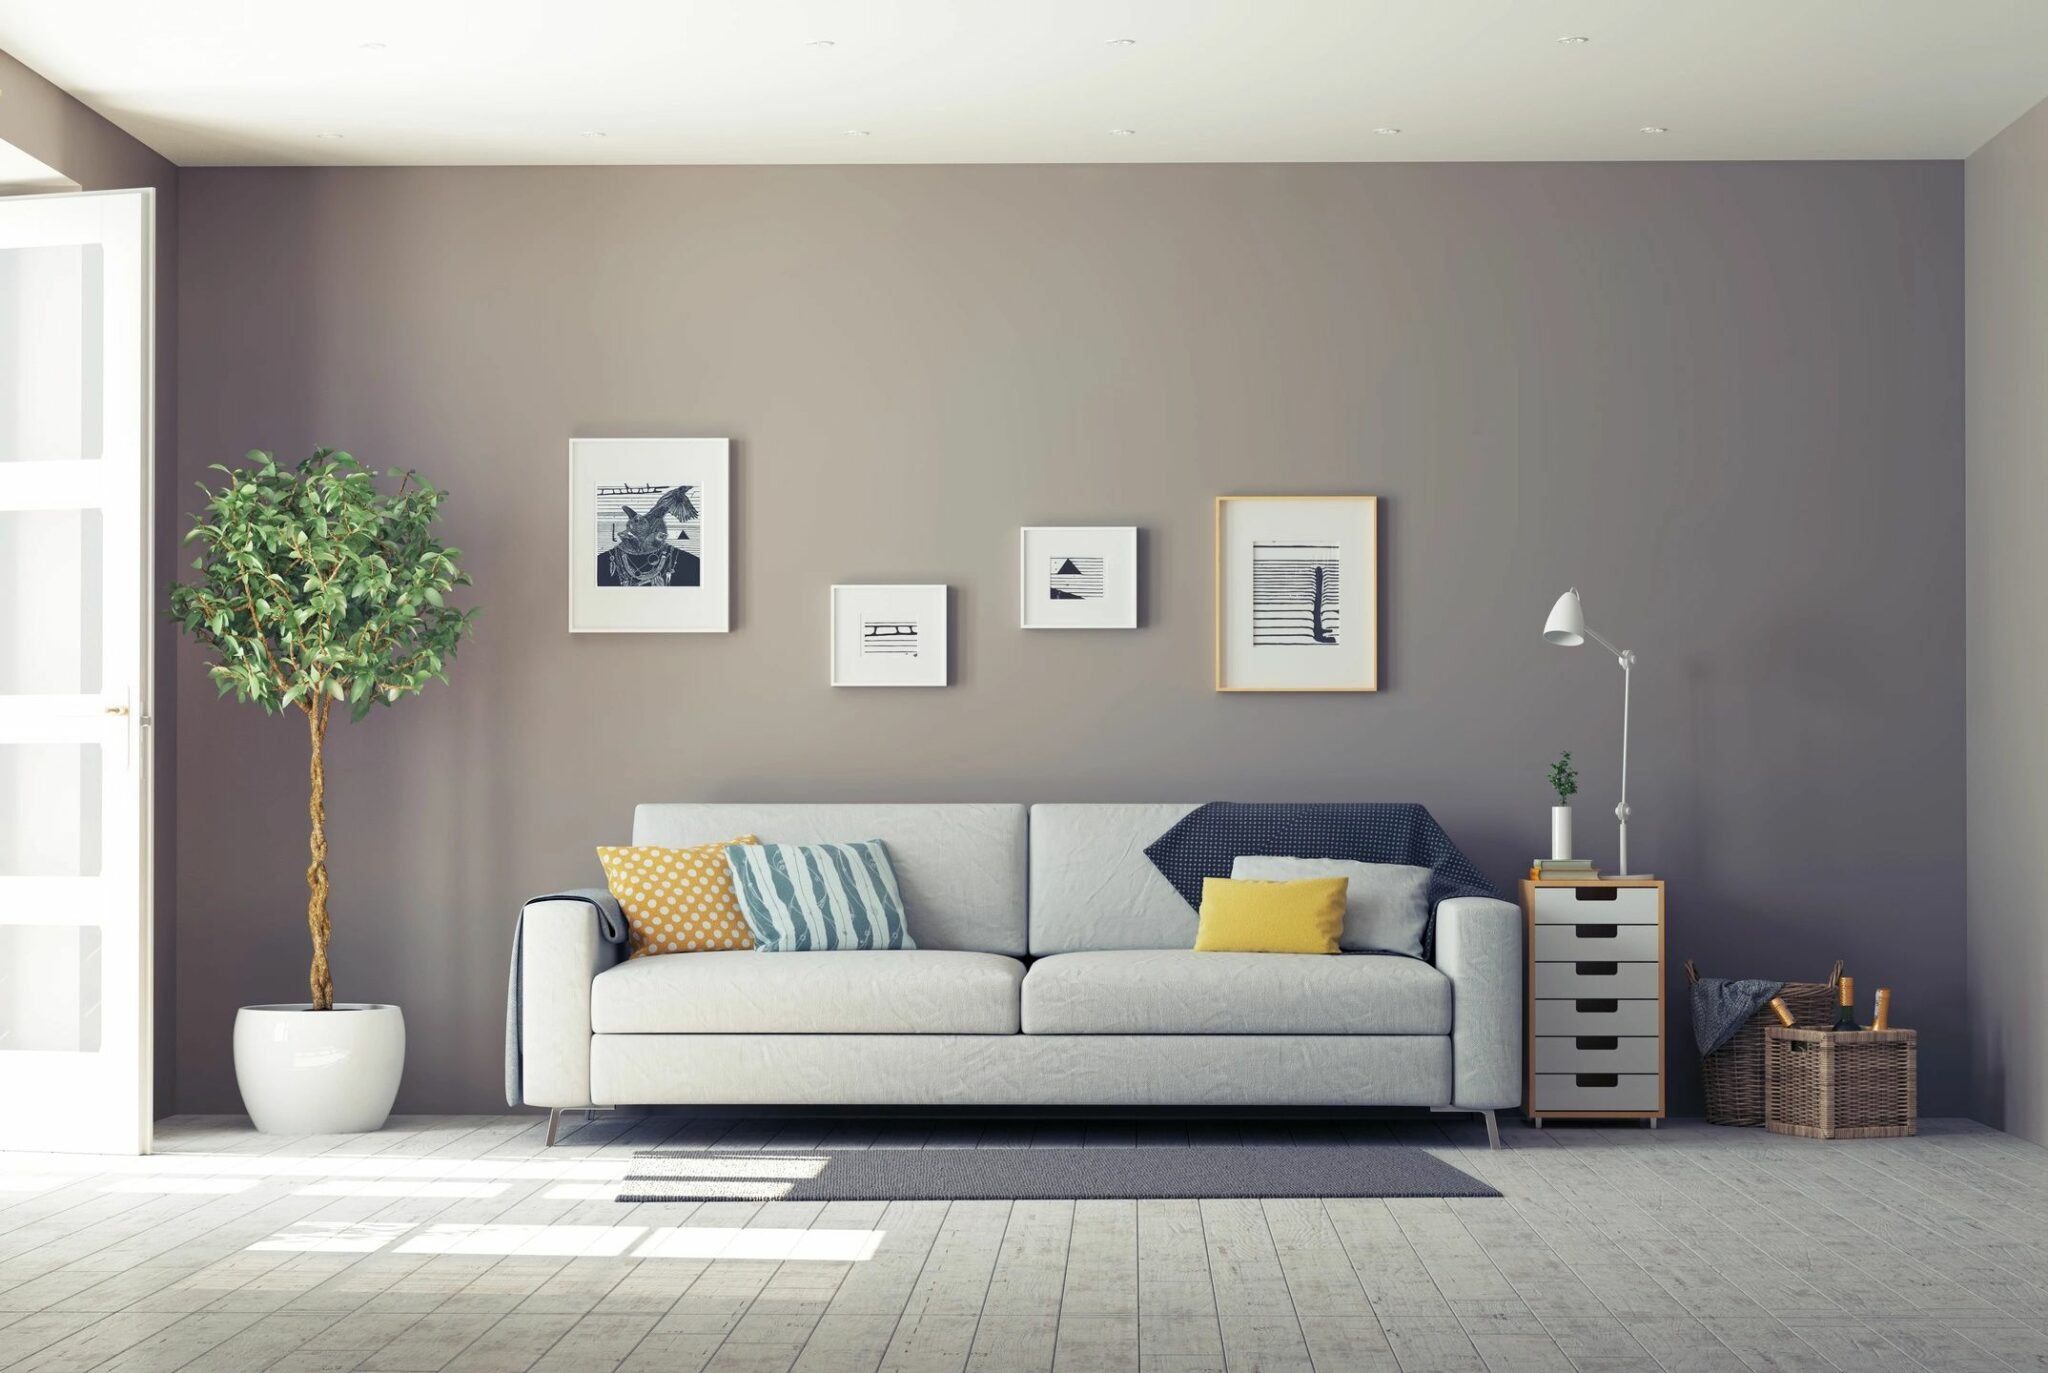 The Color of Walls Effects Selling Price Of Homes